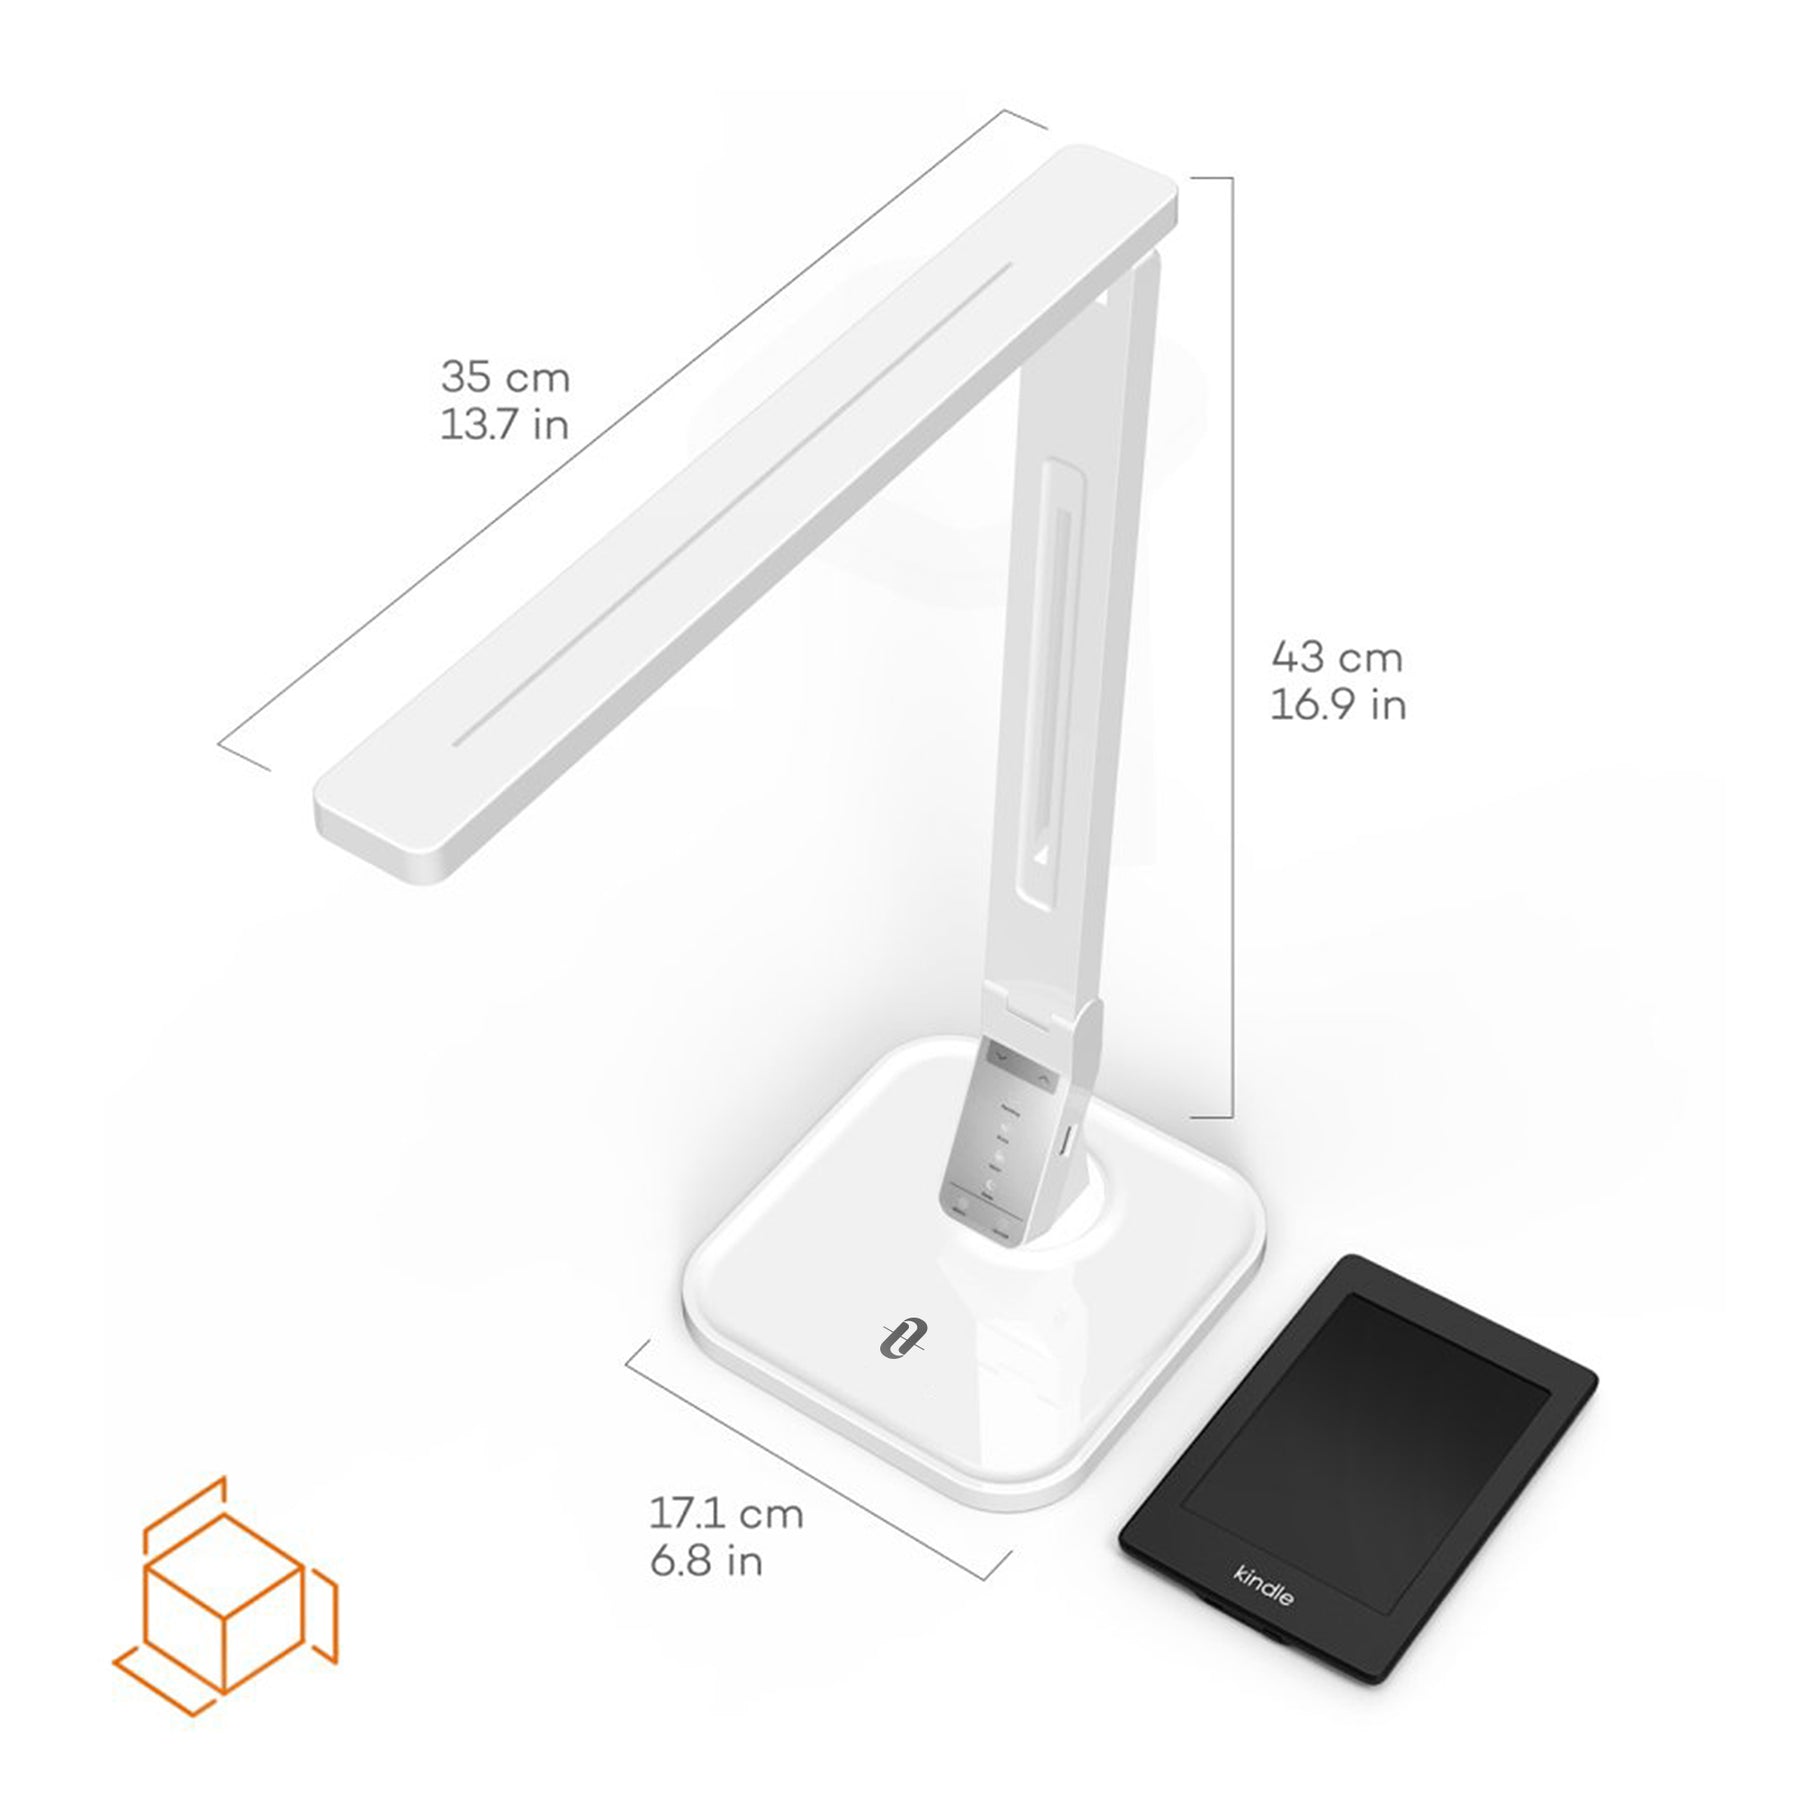 TaoTronics TT-DL02 LED Desk Lamp with USB Charging Port, 4 Lighting Modes with 5 Brightness Levels, 1h Timer, Touch Control, Memory Function, White, 14W